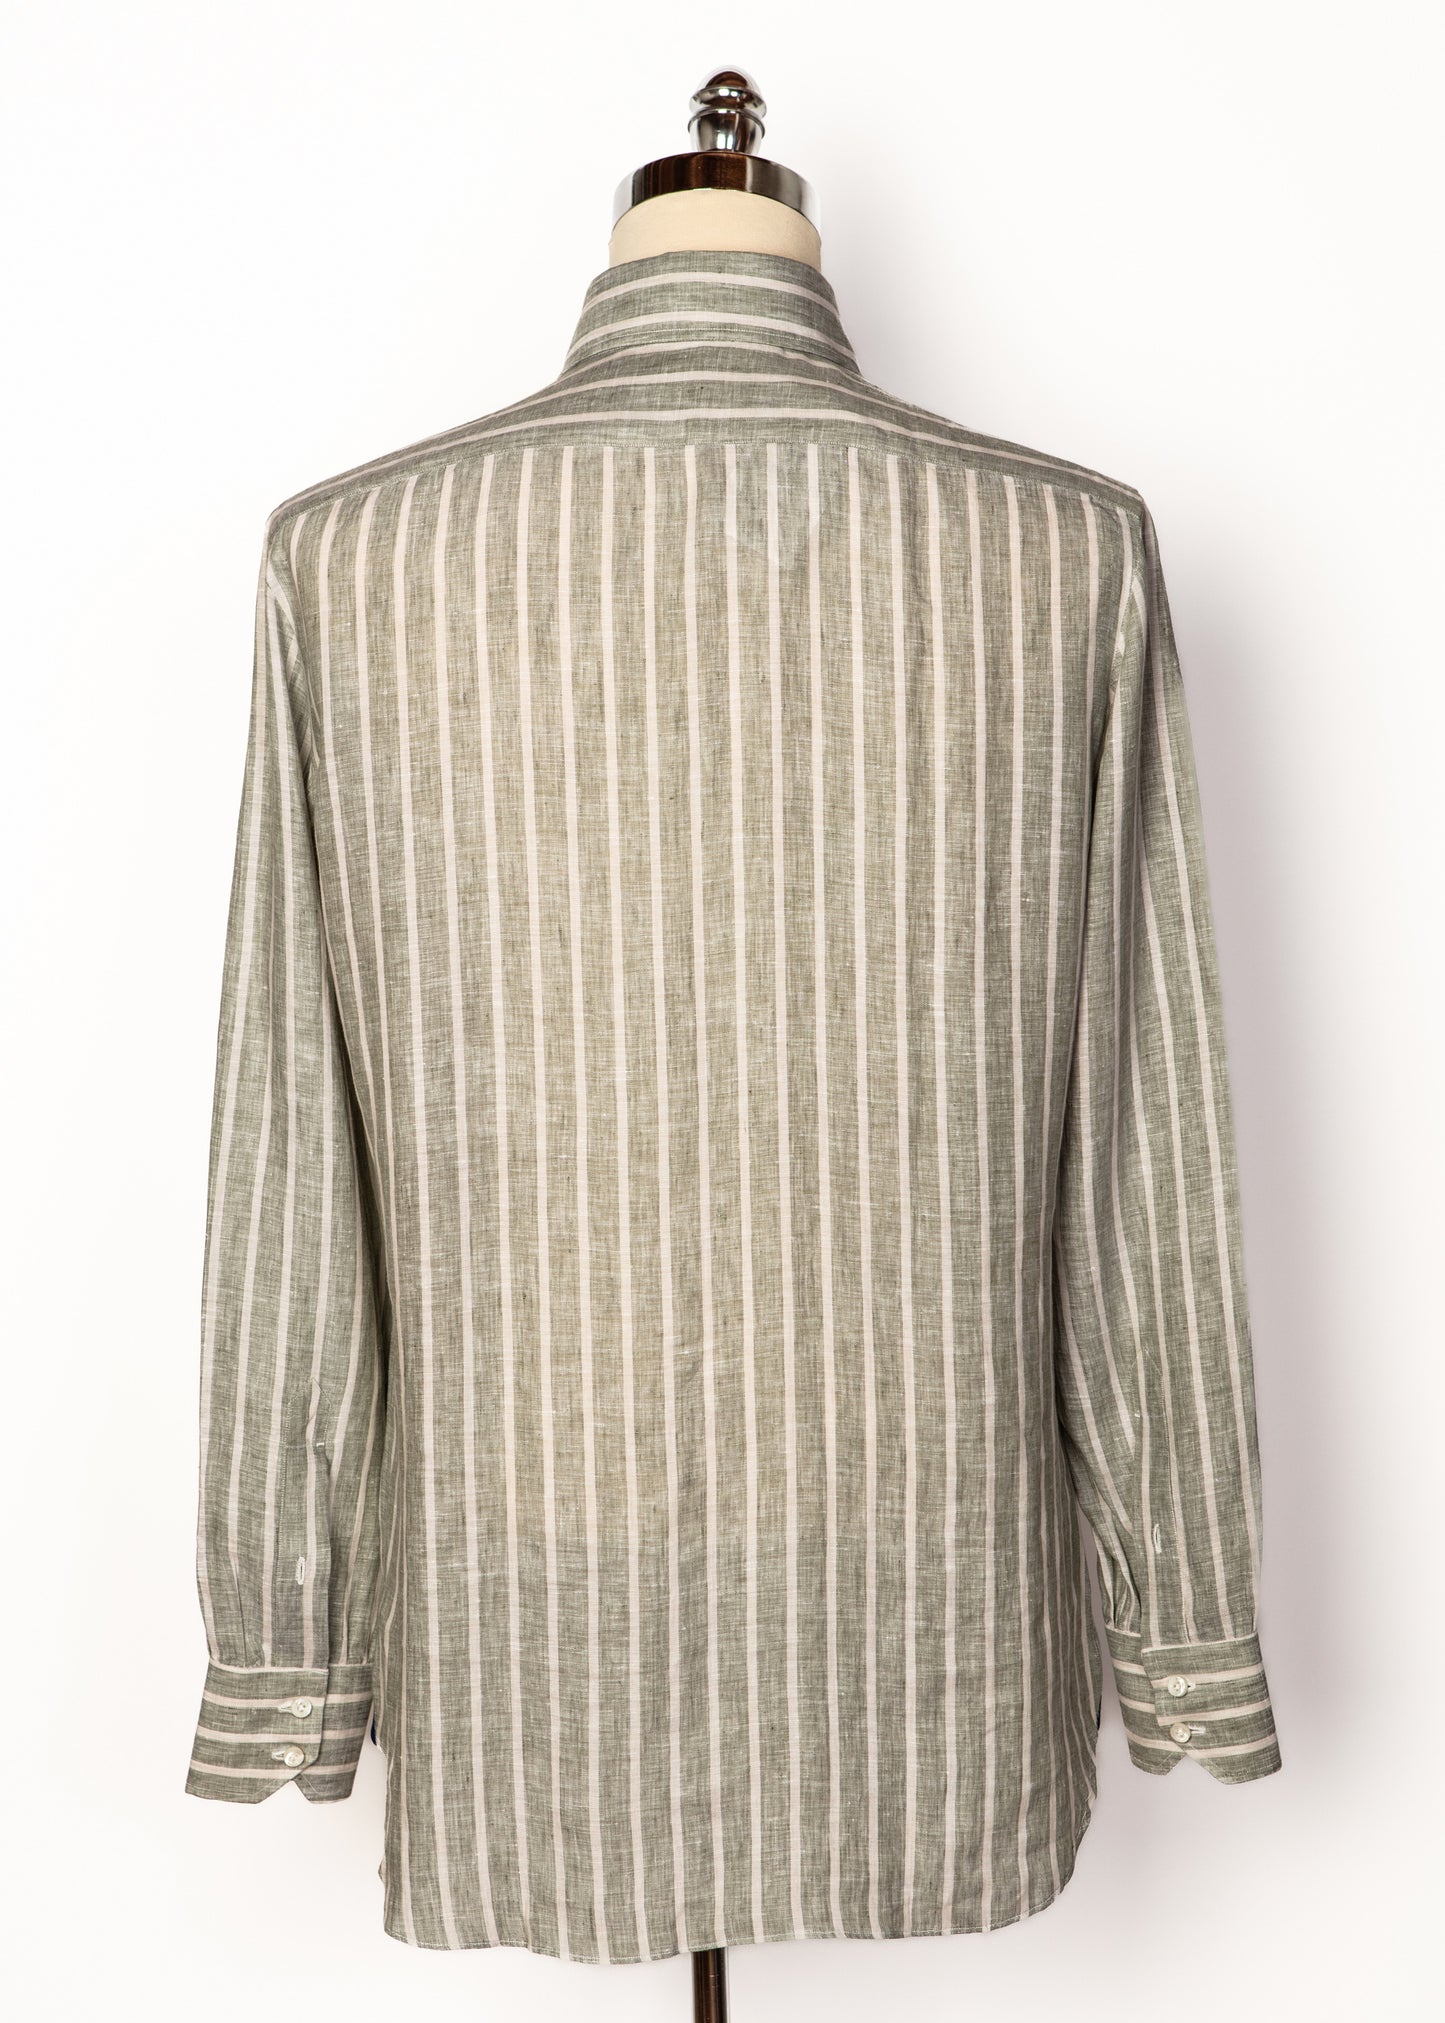 Classic Shirt in Sage w/White Stripes